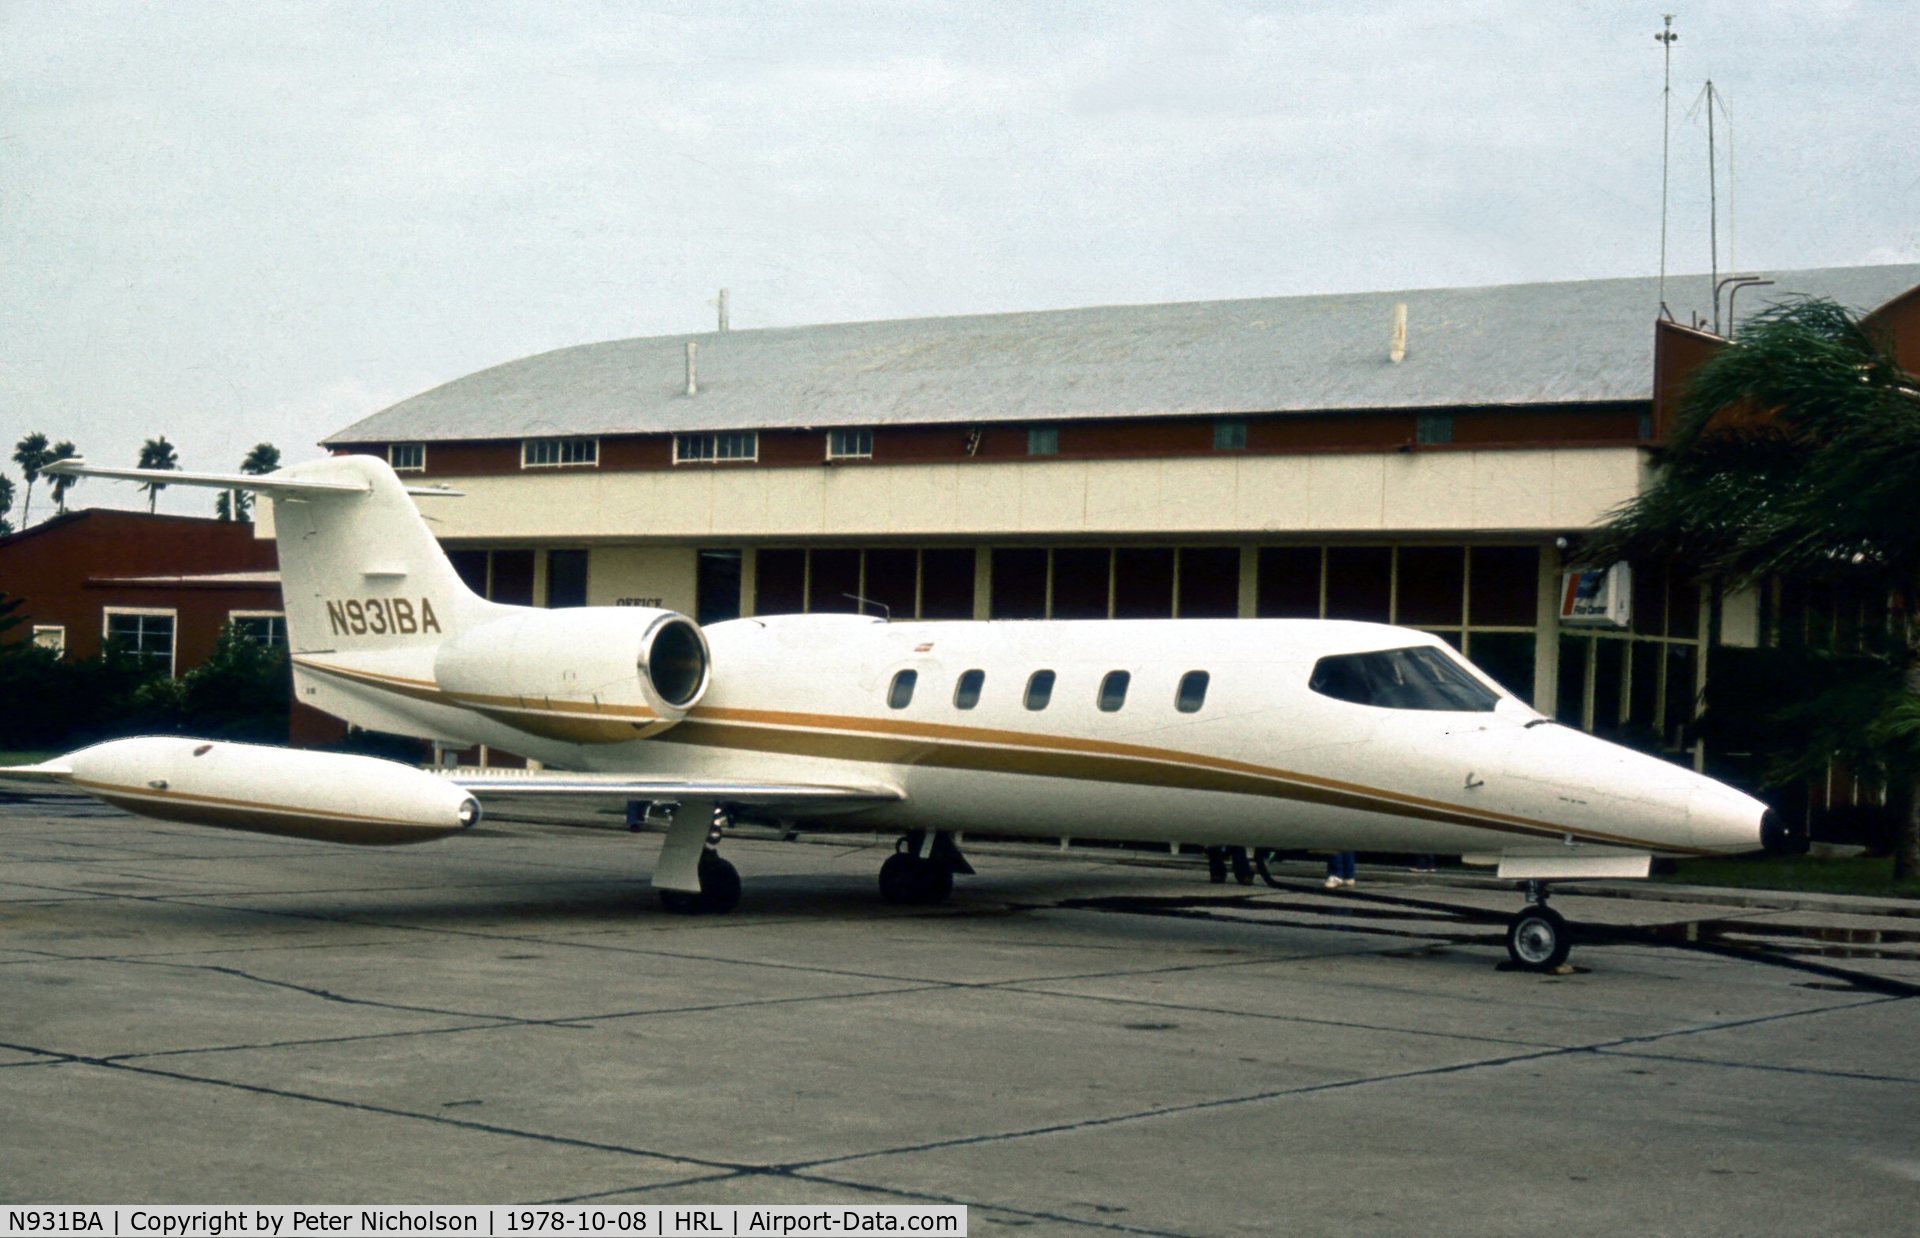 N931BA, 1974 Gates Learjet 35 C/N 003, Learjet 35 visitor to the 1978 Confederate Air Force's Airshow at Harlingen.